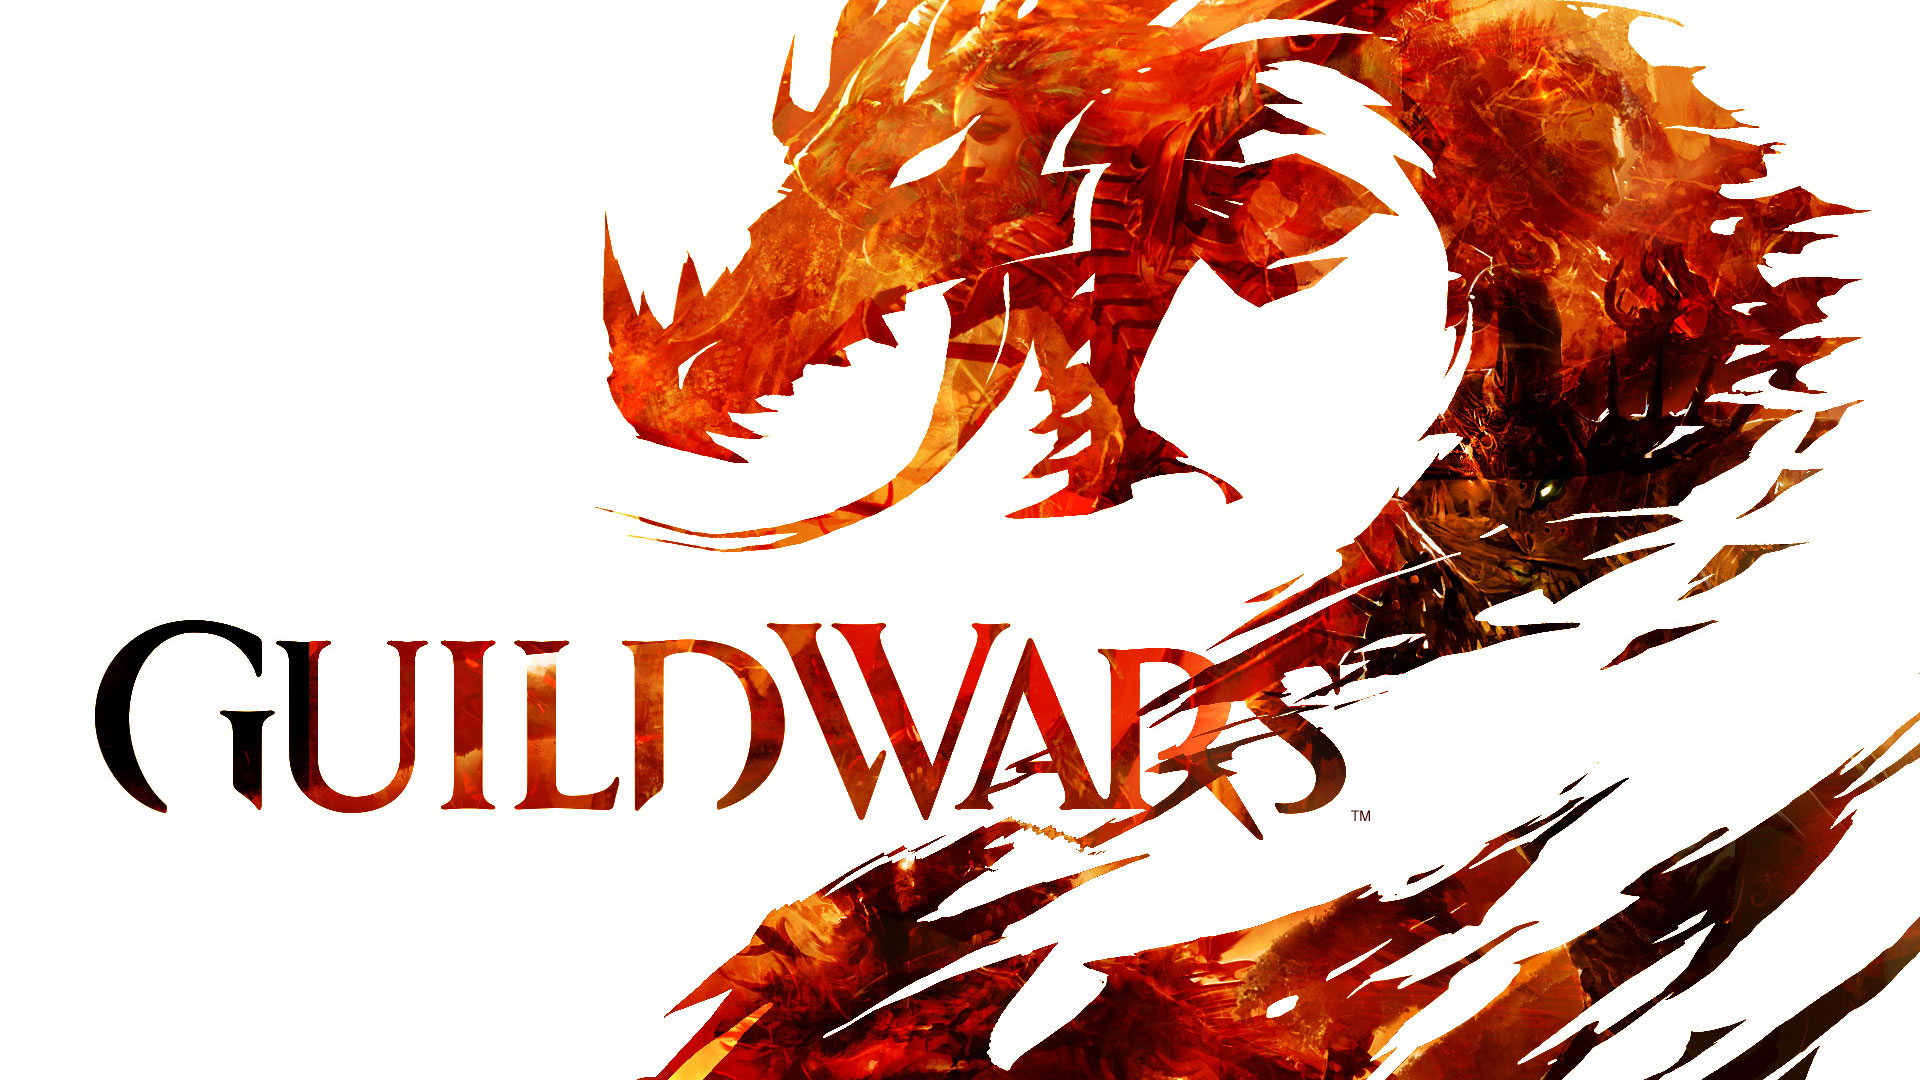 Guild Wars 2 (GW2): Which Classes to play?